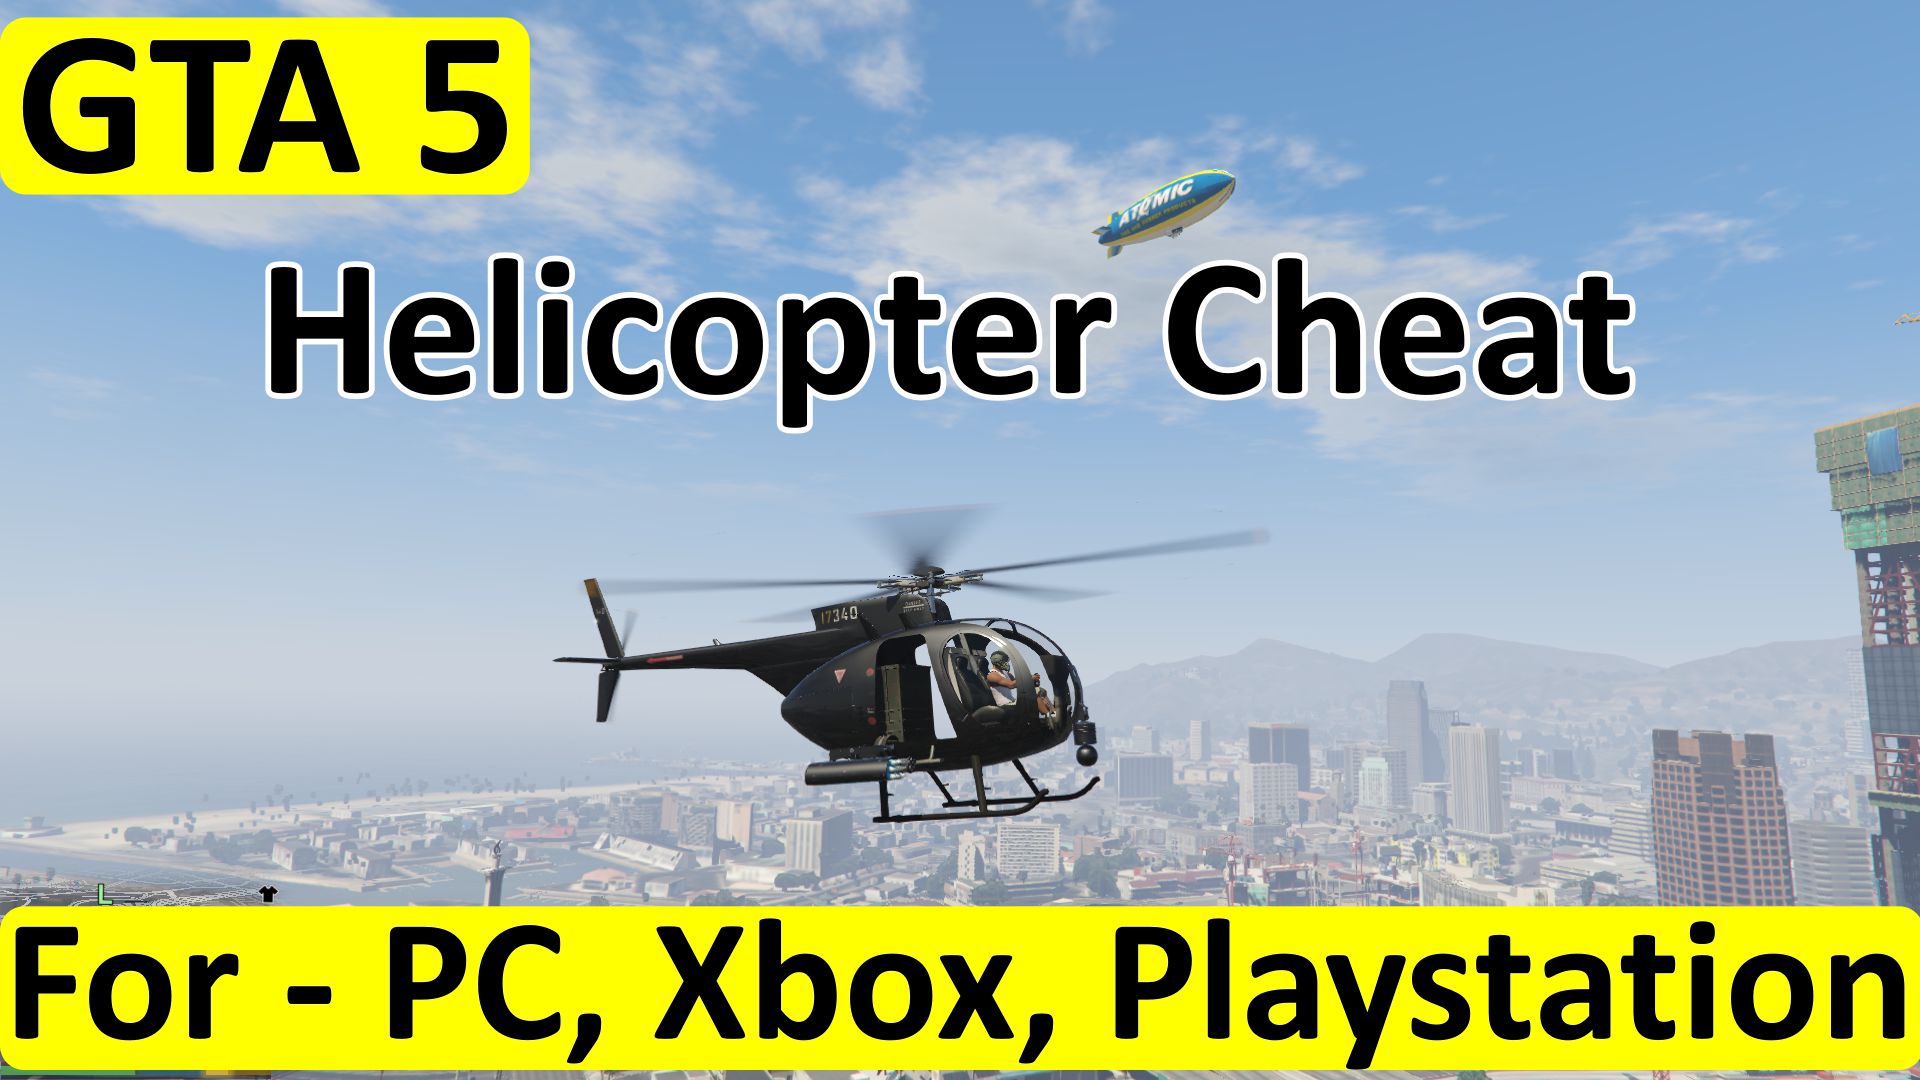 GTA 5 helicopter cheat - for PC, Xbox,Playstation